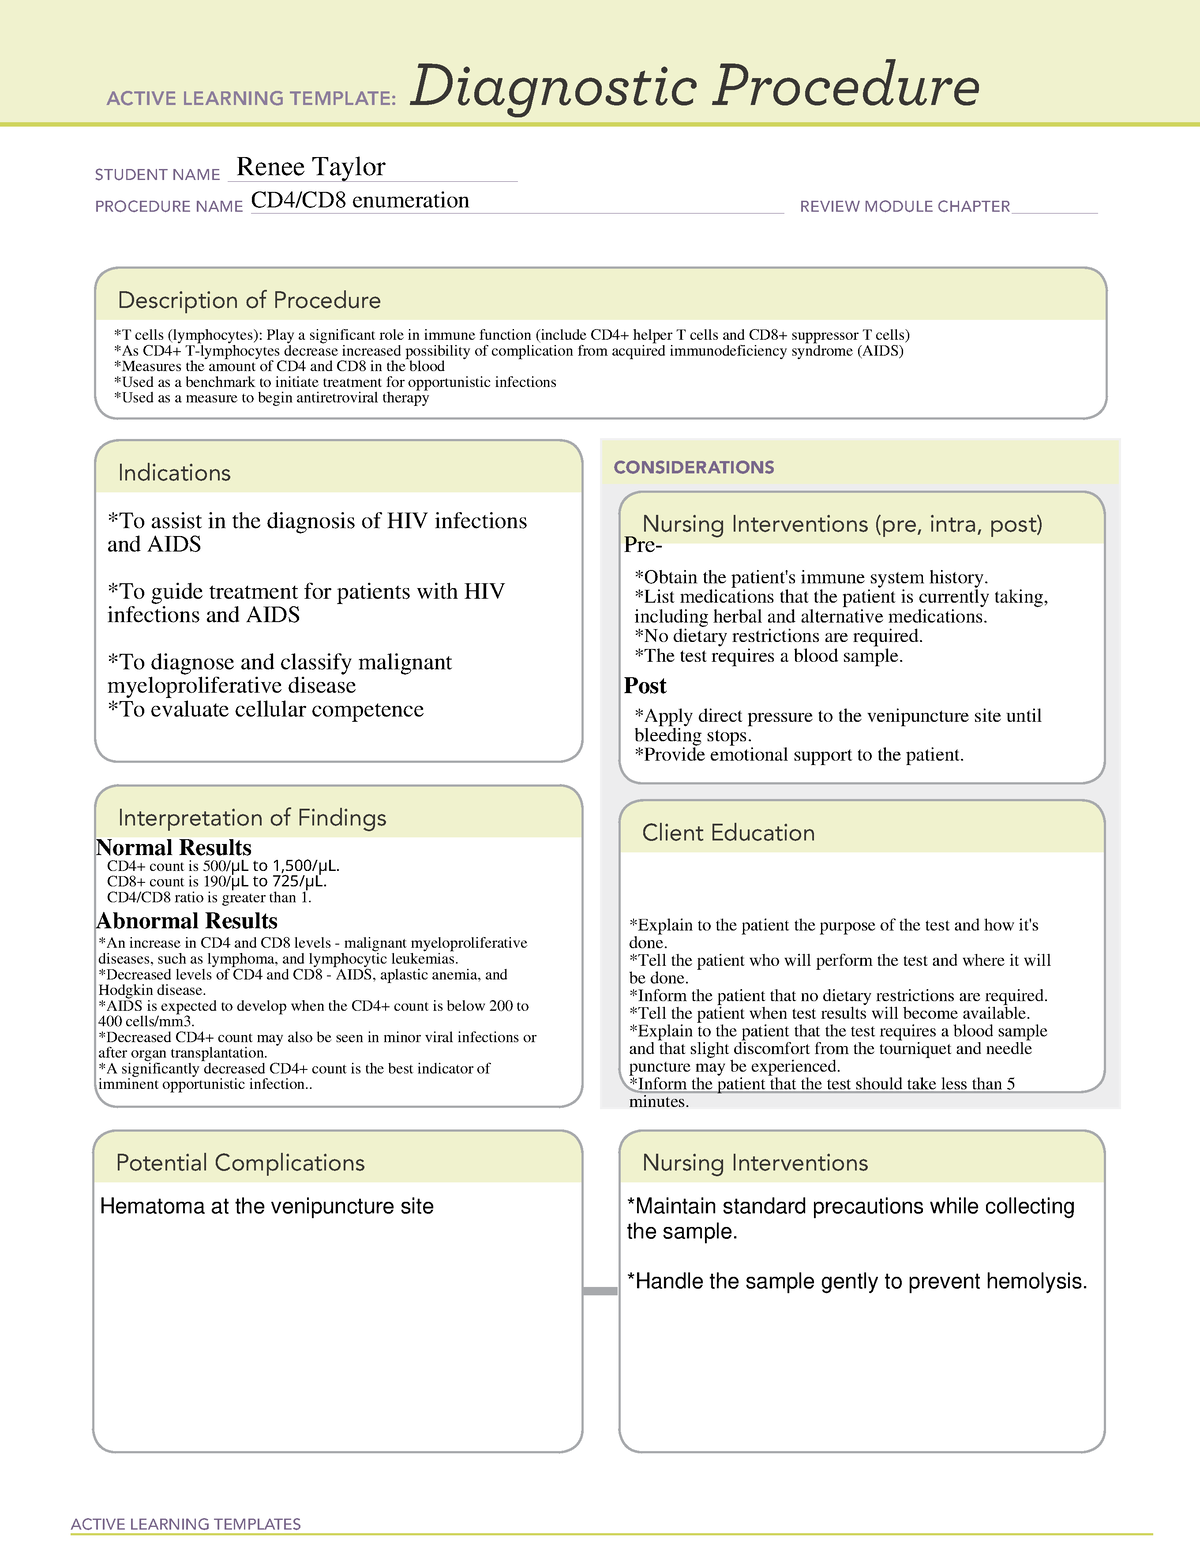 CD4 CD8 enumeration - Ati Systems Disorder template - ACTIVE LEARNING ...